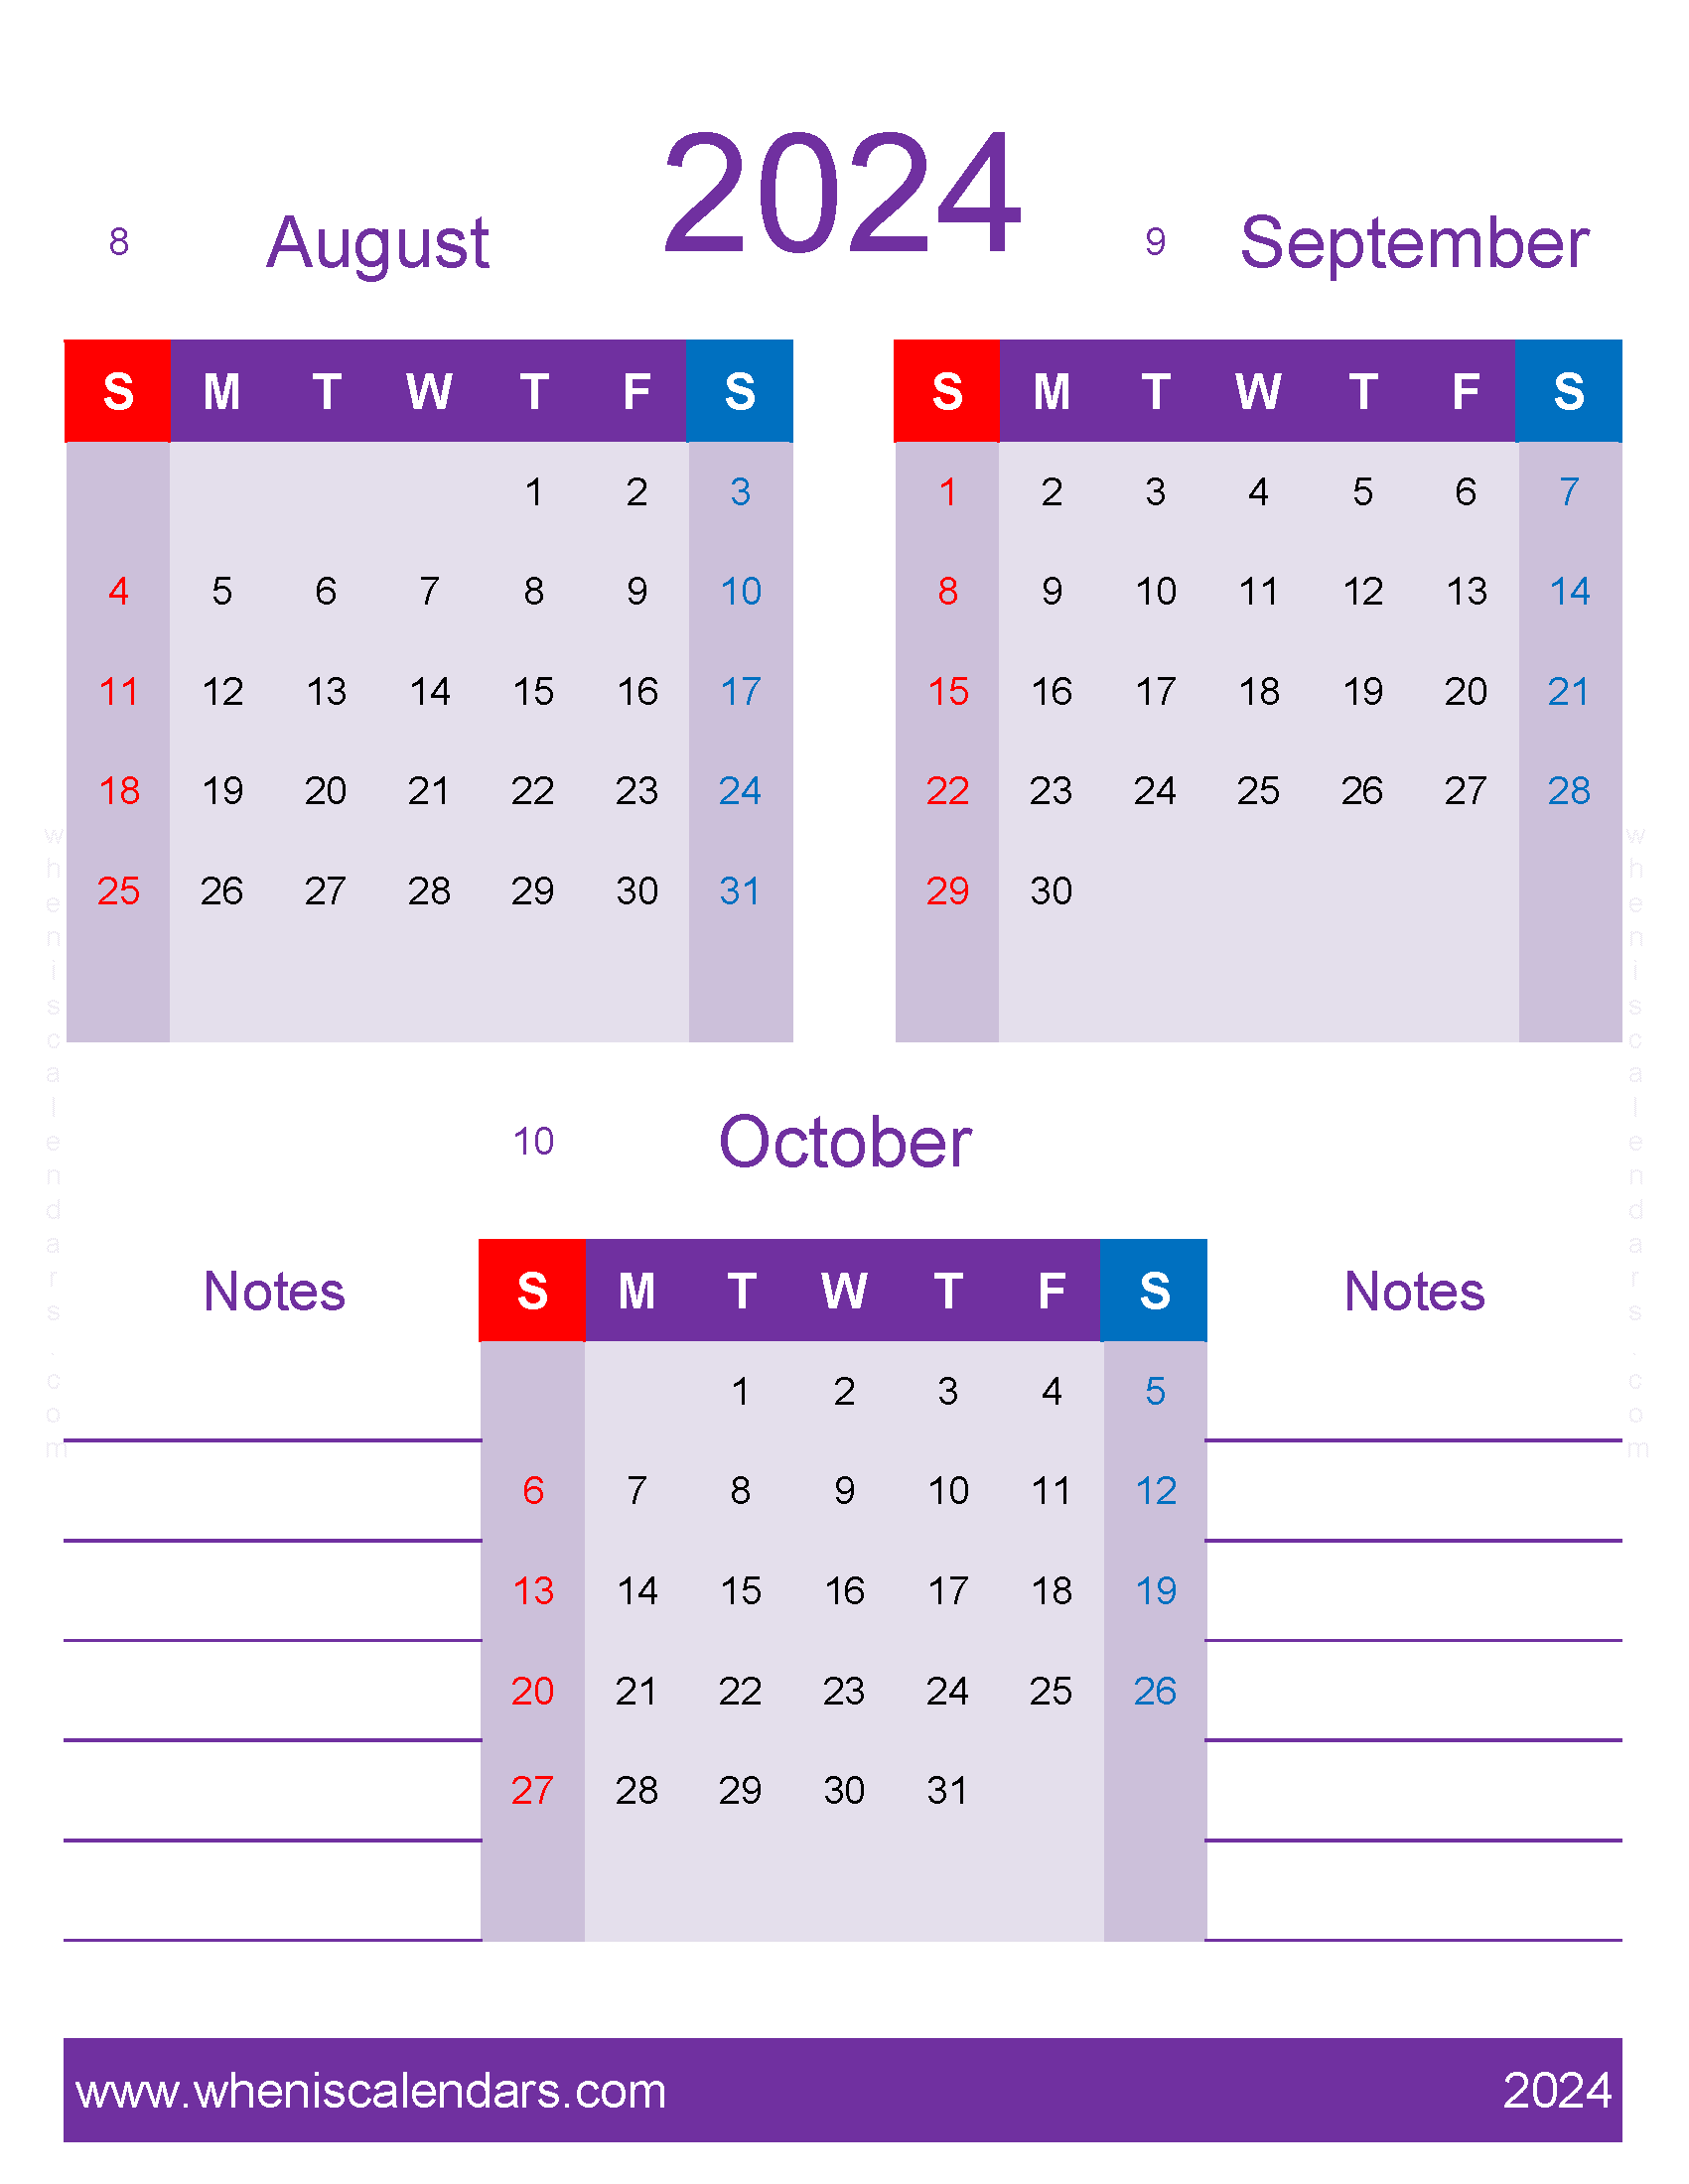 Download Calendar August to October 2024 free ASO476